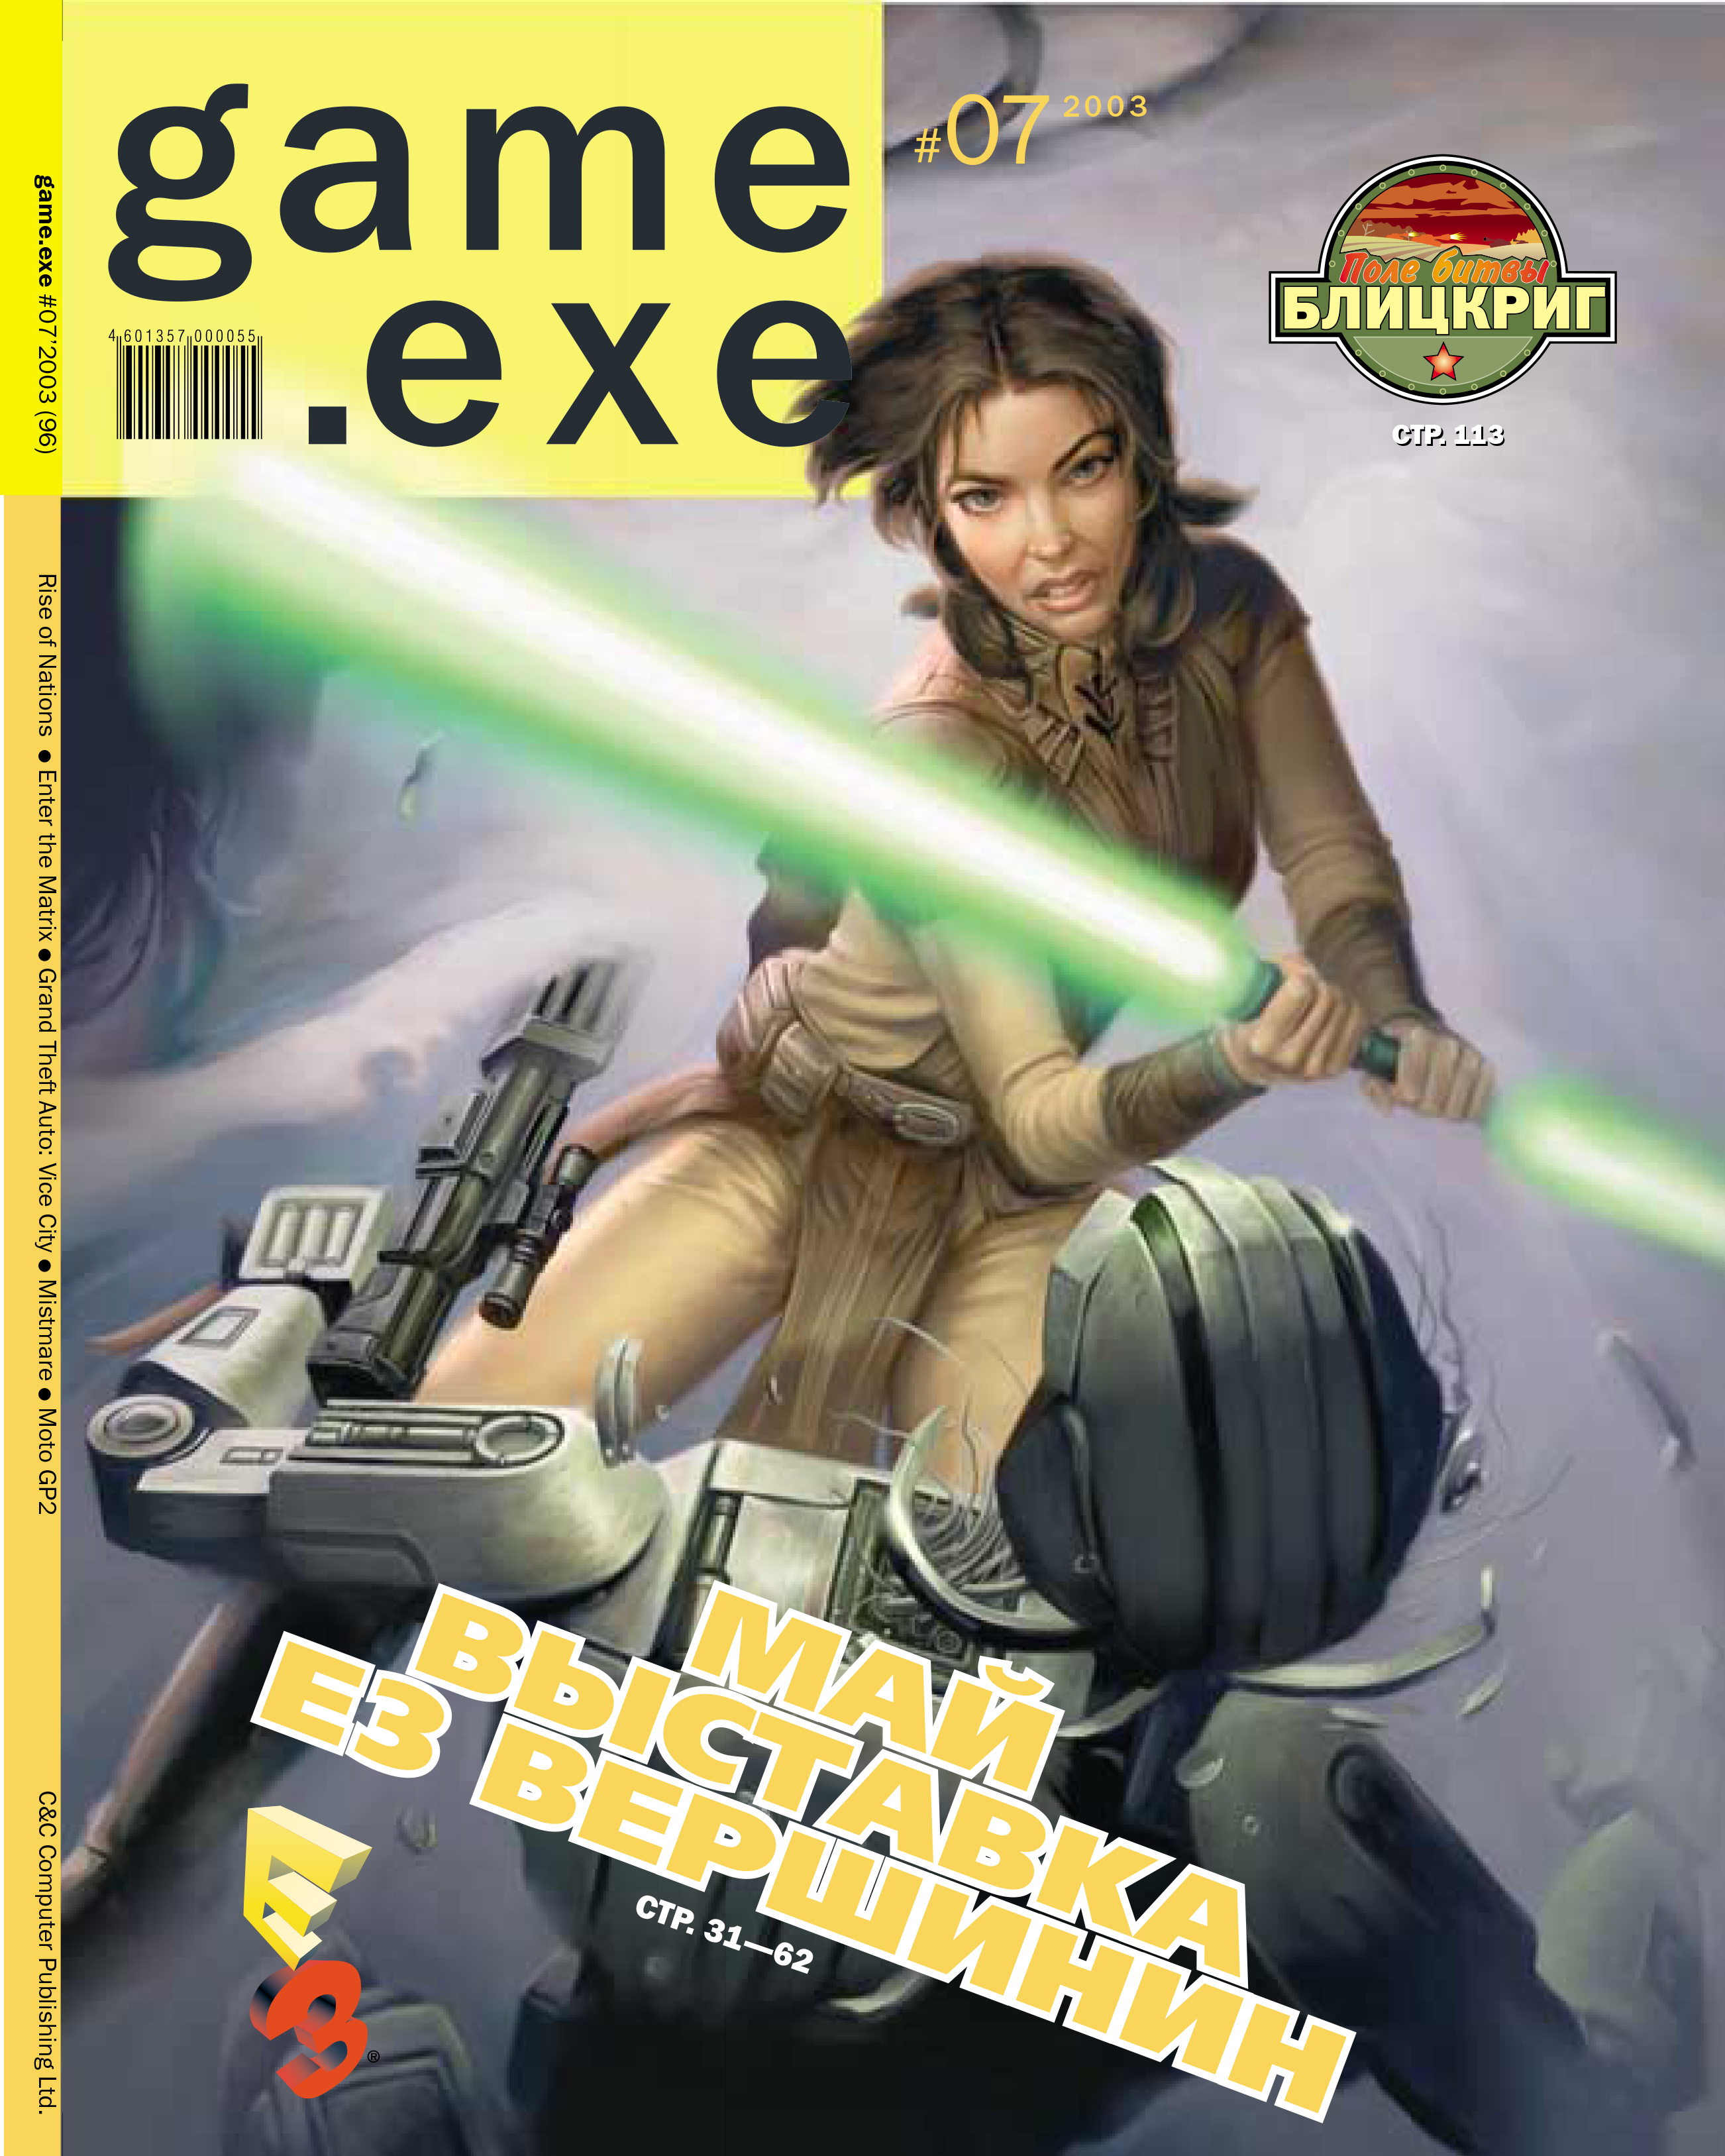 Download game exe. Game exe журнал. Game exe журнал 2003 2003 2003. Game exe журнал 2003. Журнал гейм ехе.